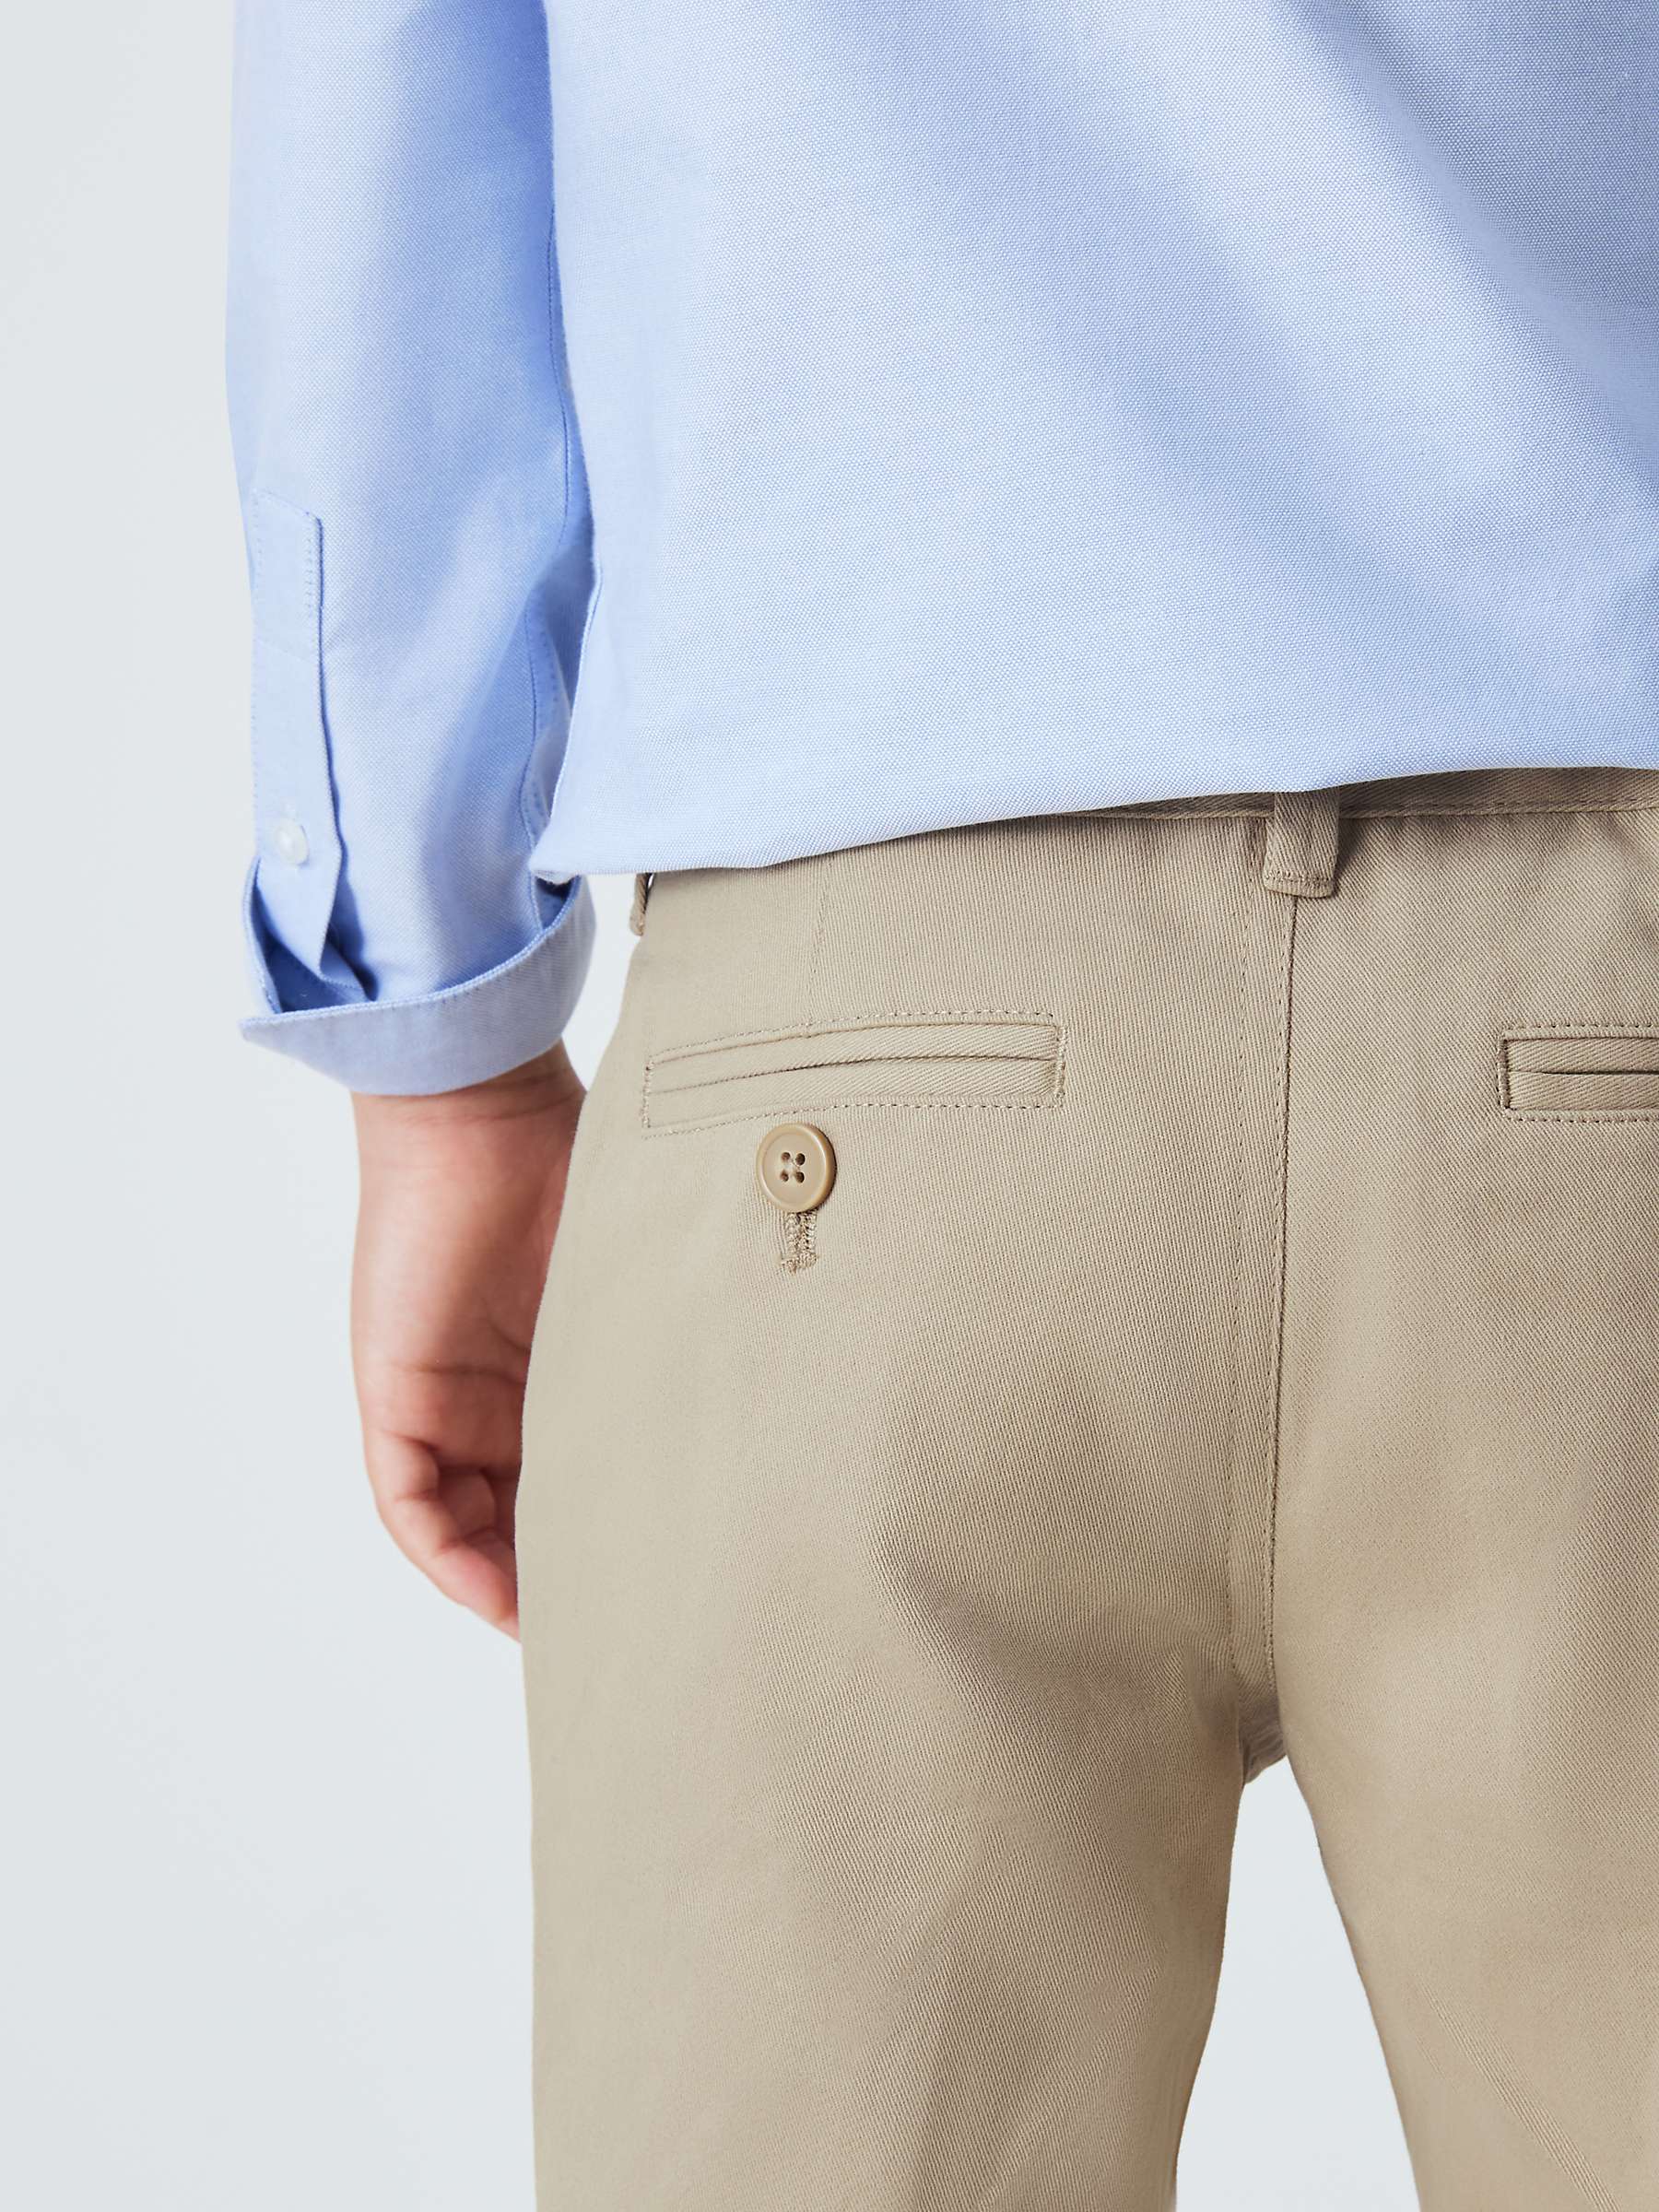 Buy John Lewis Heirloom Collection Kids' Chino Trousers Online at johnlewis.com